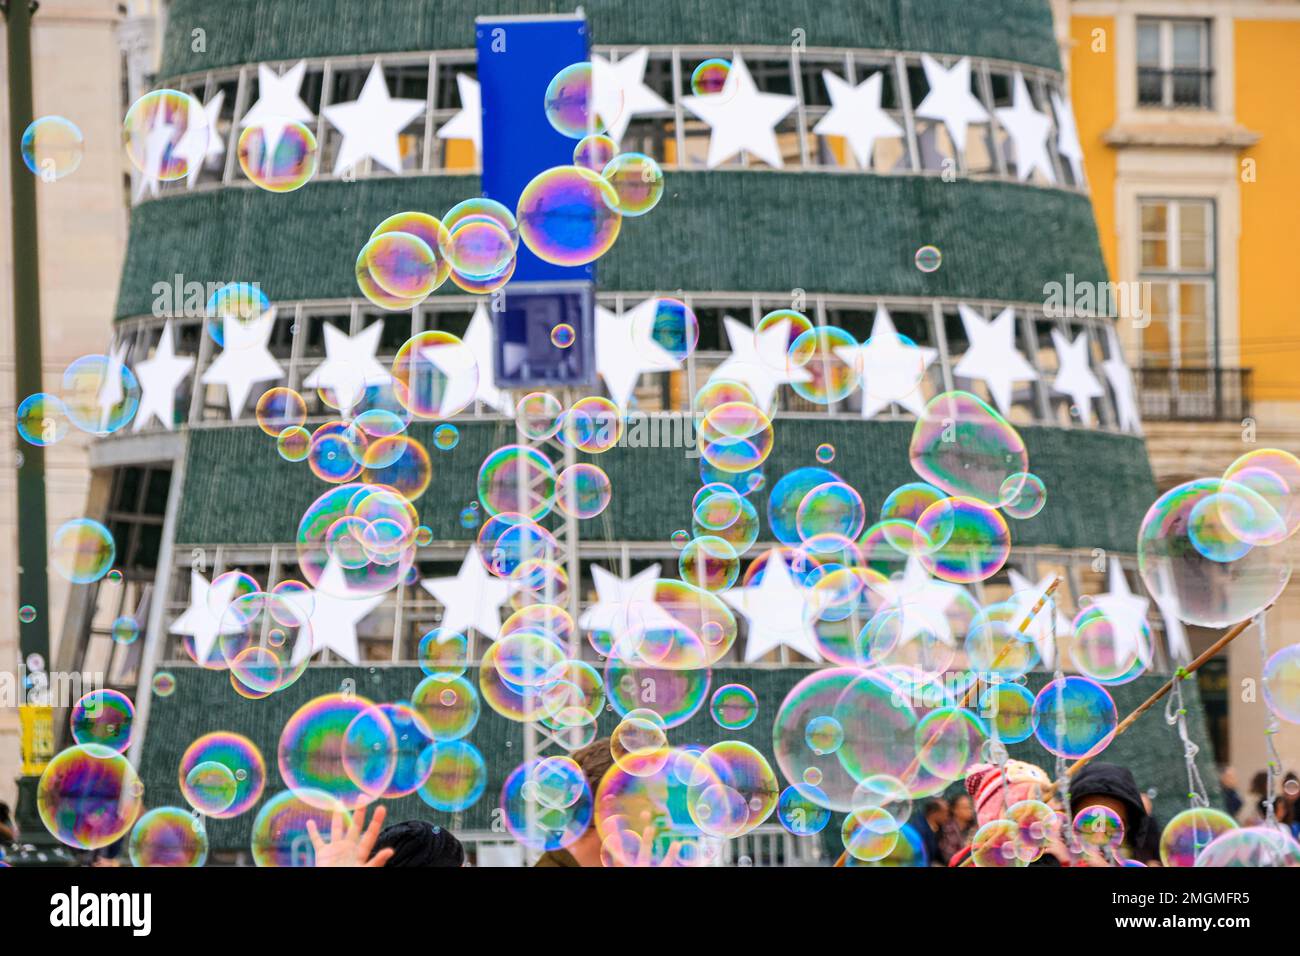 Giant soap bubbles next to the Christmas tree at Comercio square, Lisbon, Portugal Stock Photo